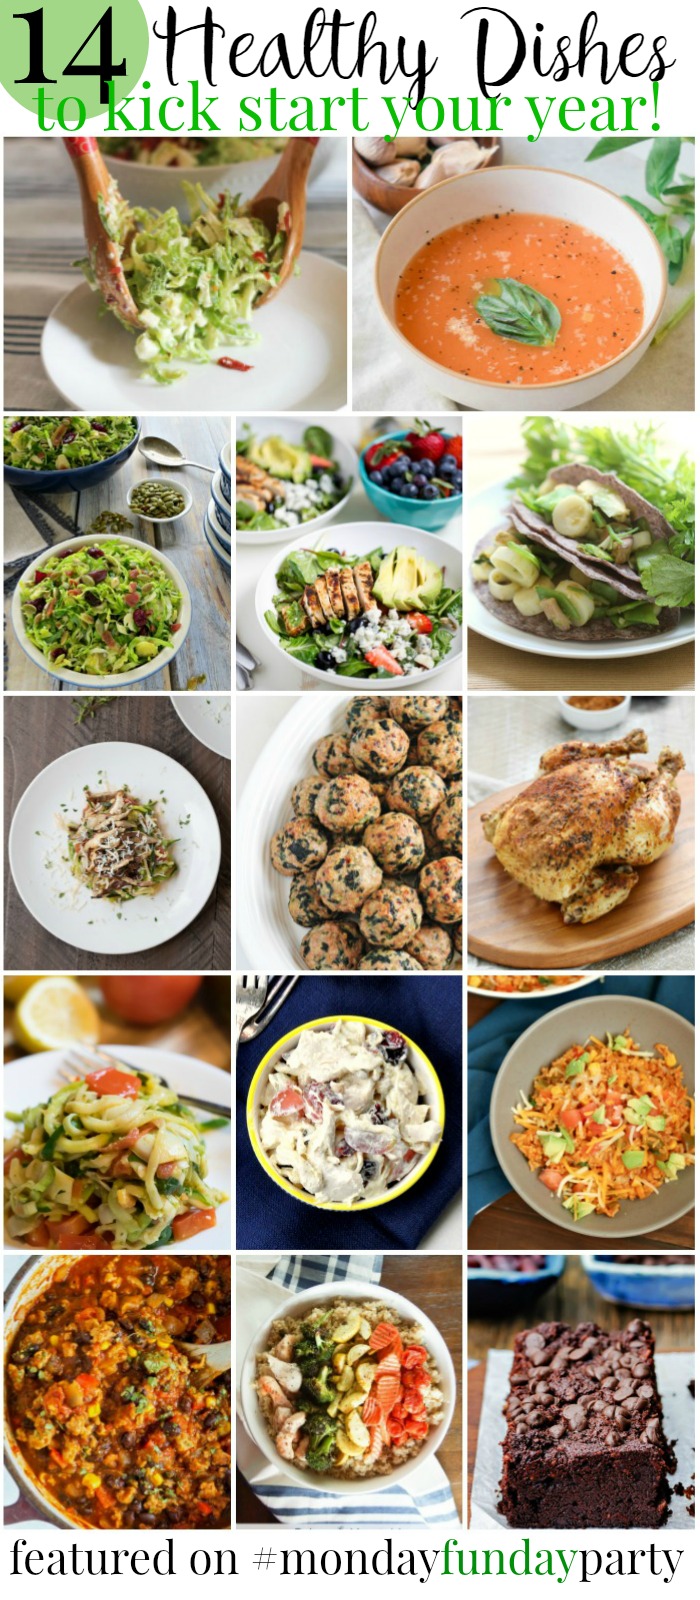 Healthy Dishes for Healthy Eating Monday Funday Liink Party